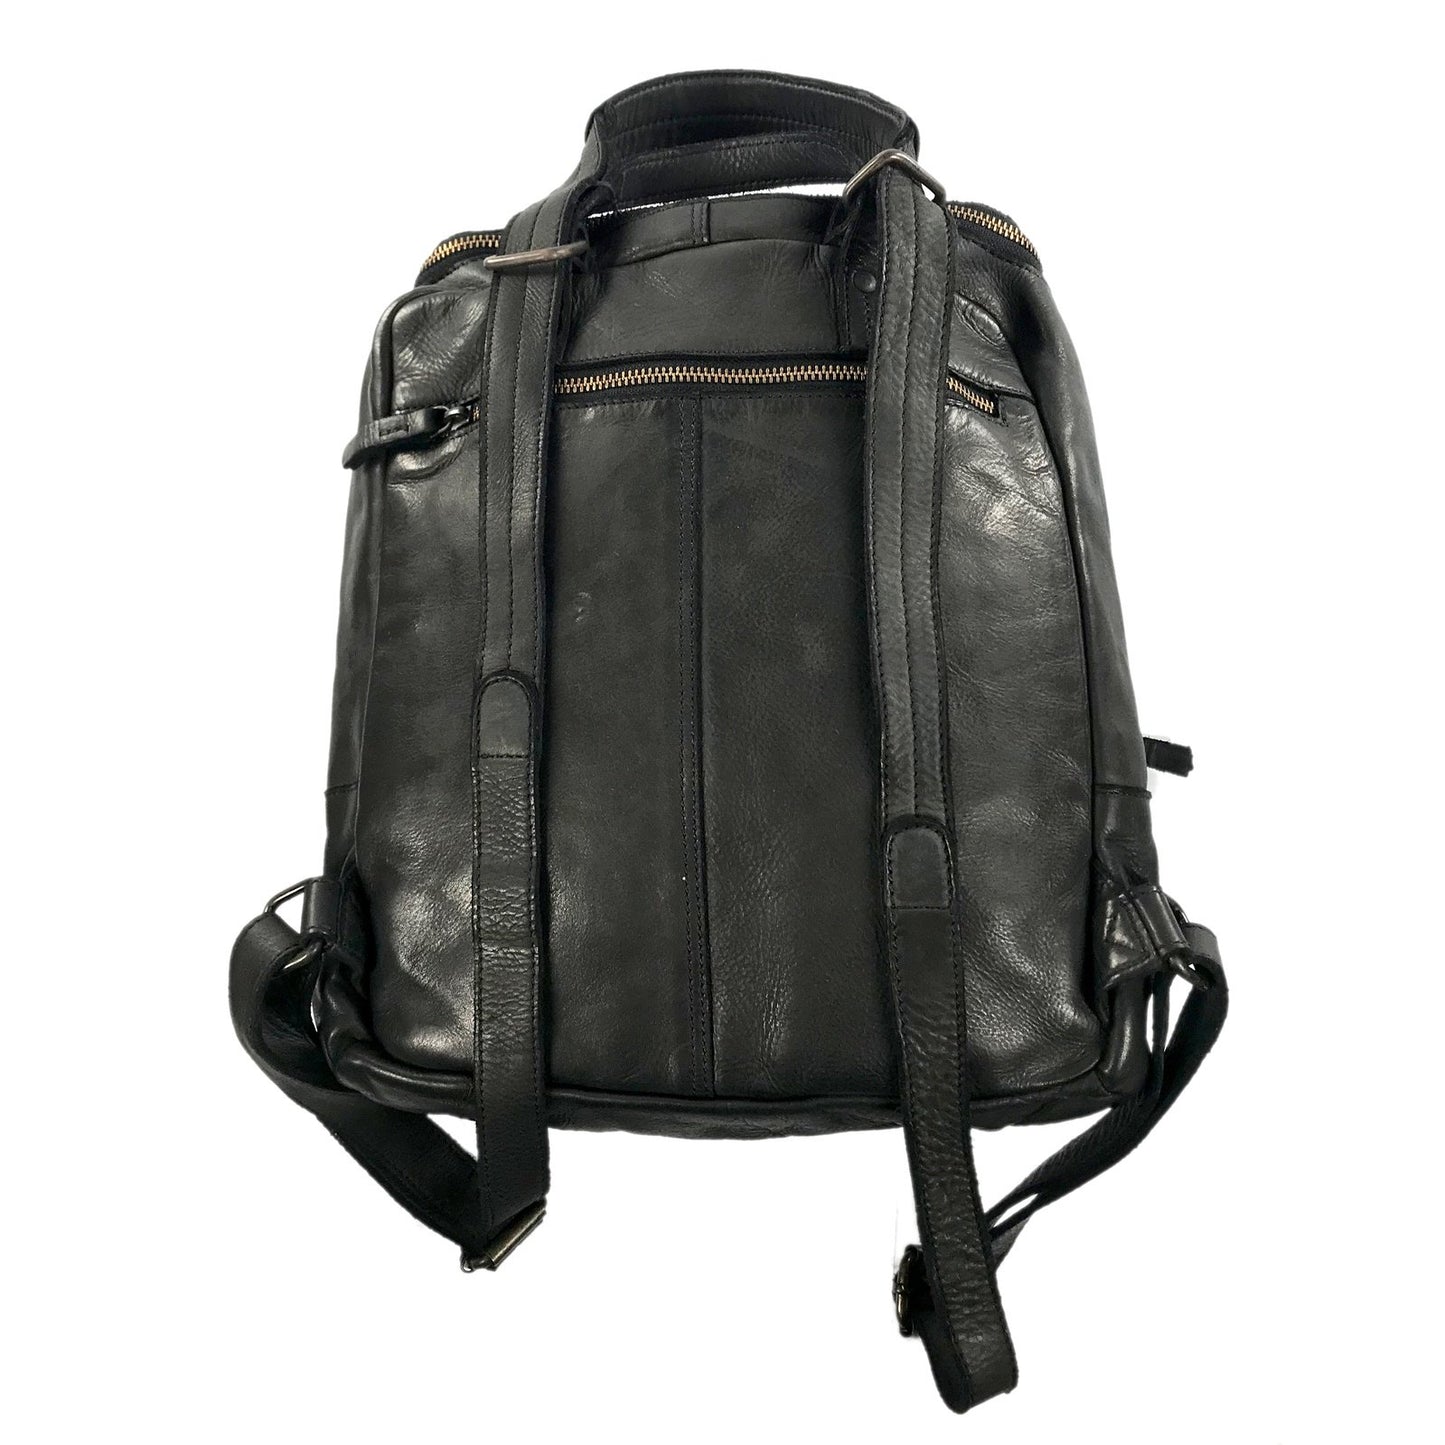 Submarine Backpack small